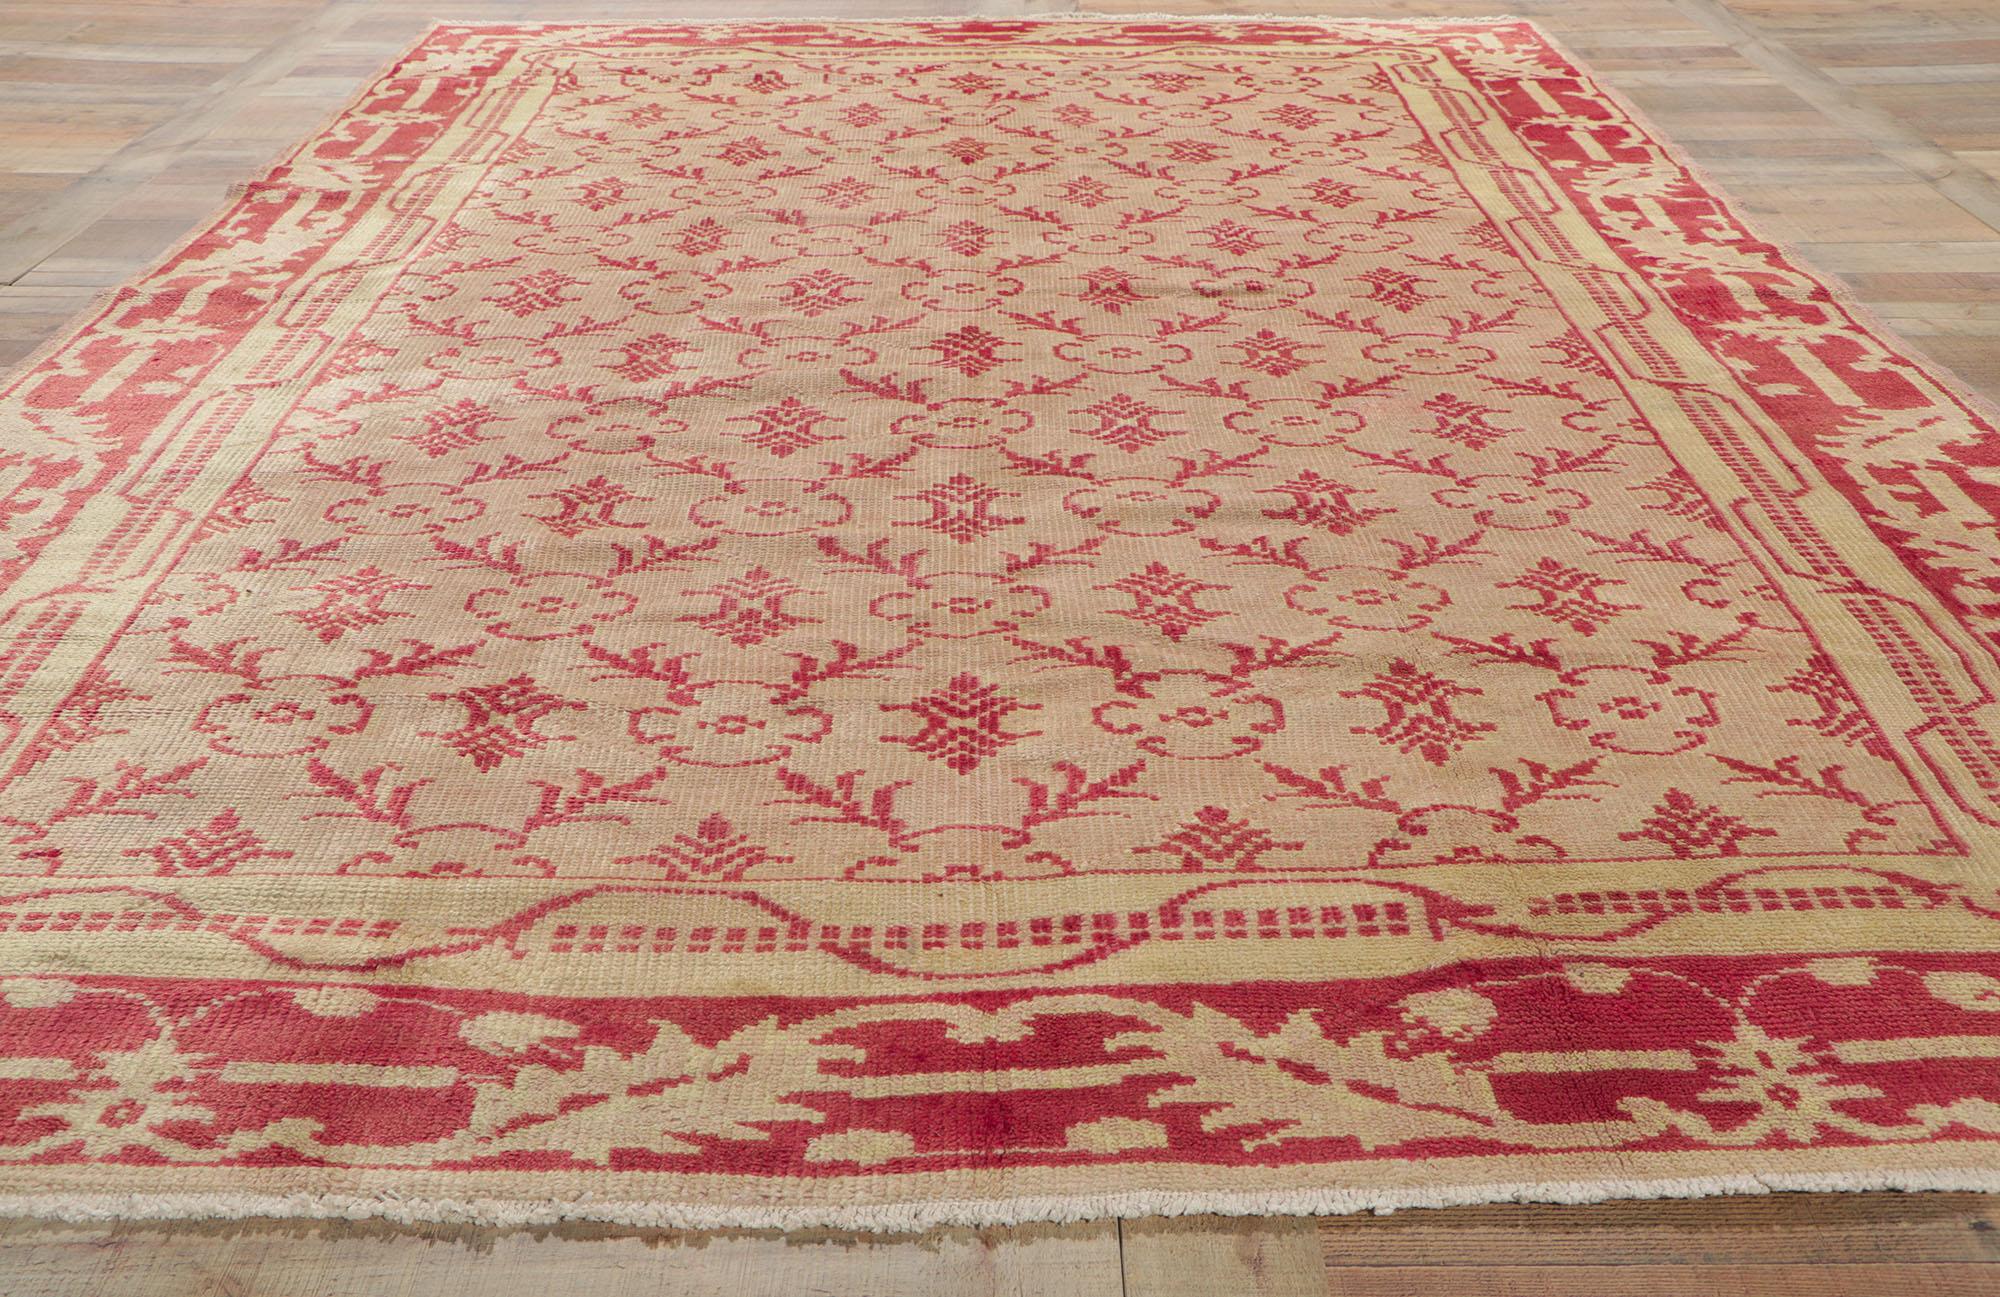 Vintage Turkish Oushak Rug with Lattice and Leaf Border, Traditional Style For Sale 5